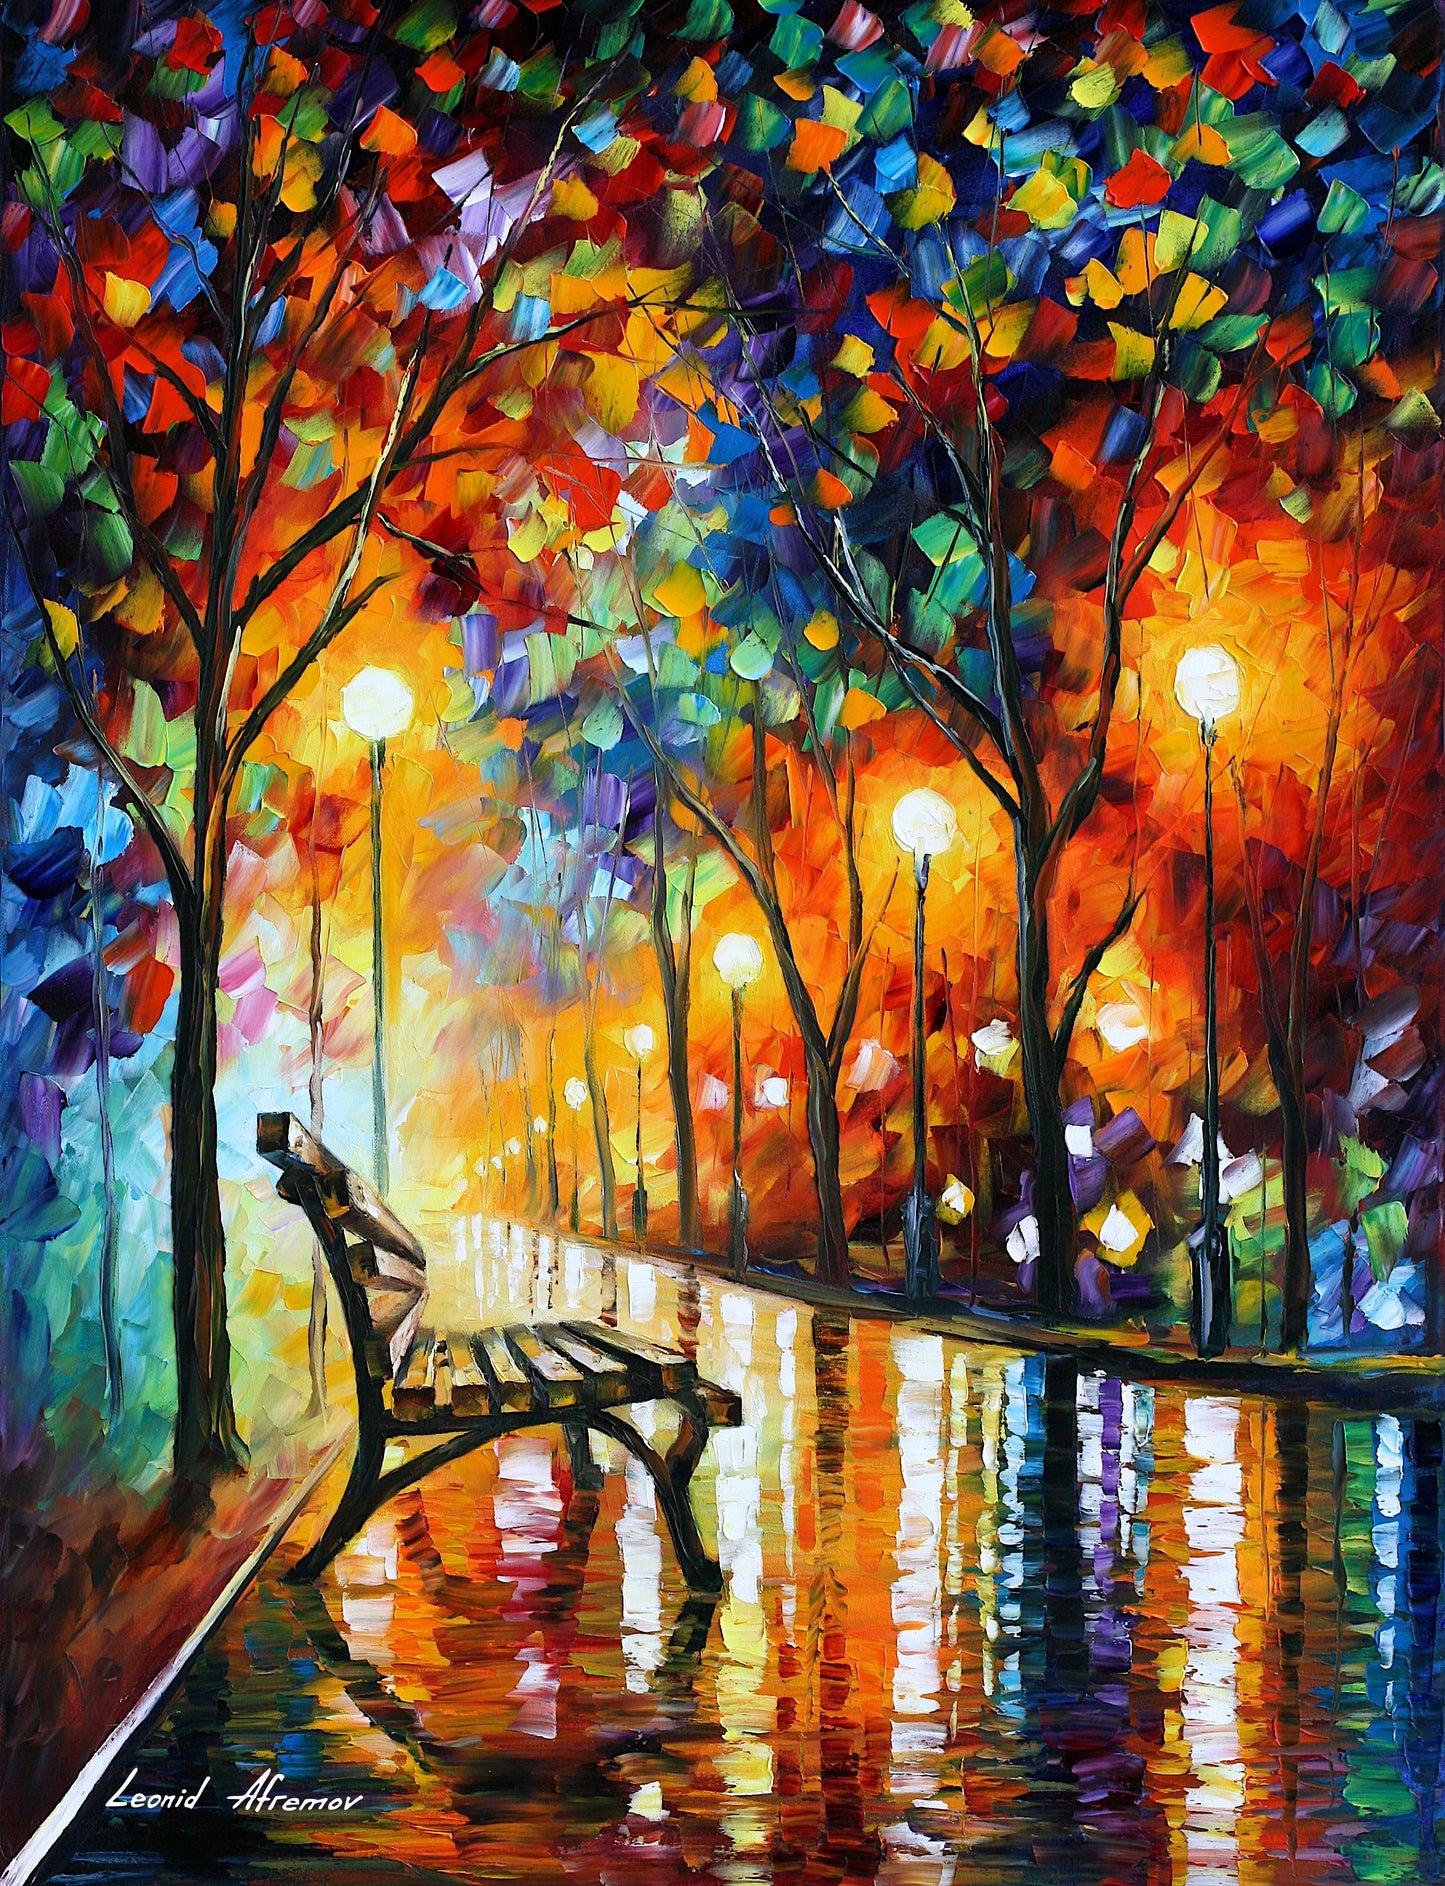 THE LONELINESS OF AUTUMN - Afremov - Paint By Numbers Kit